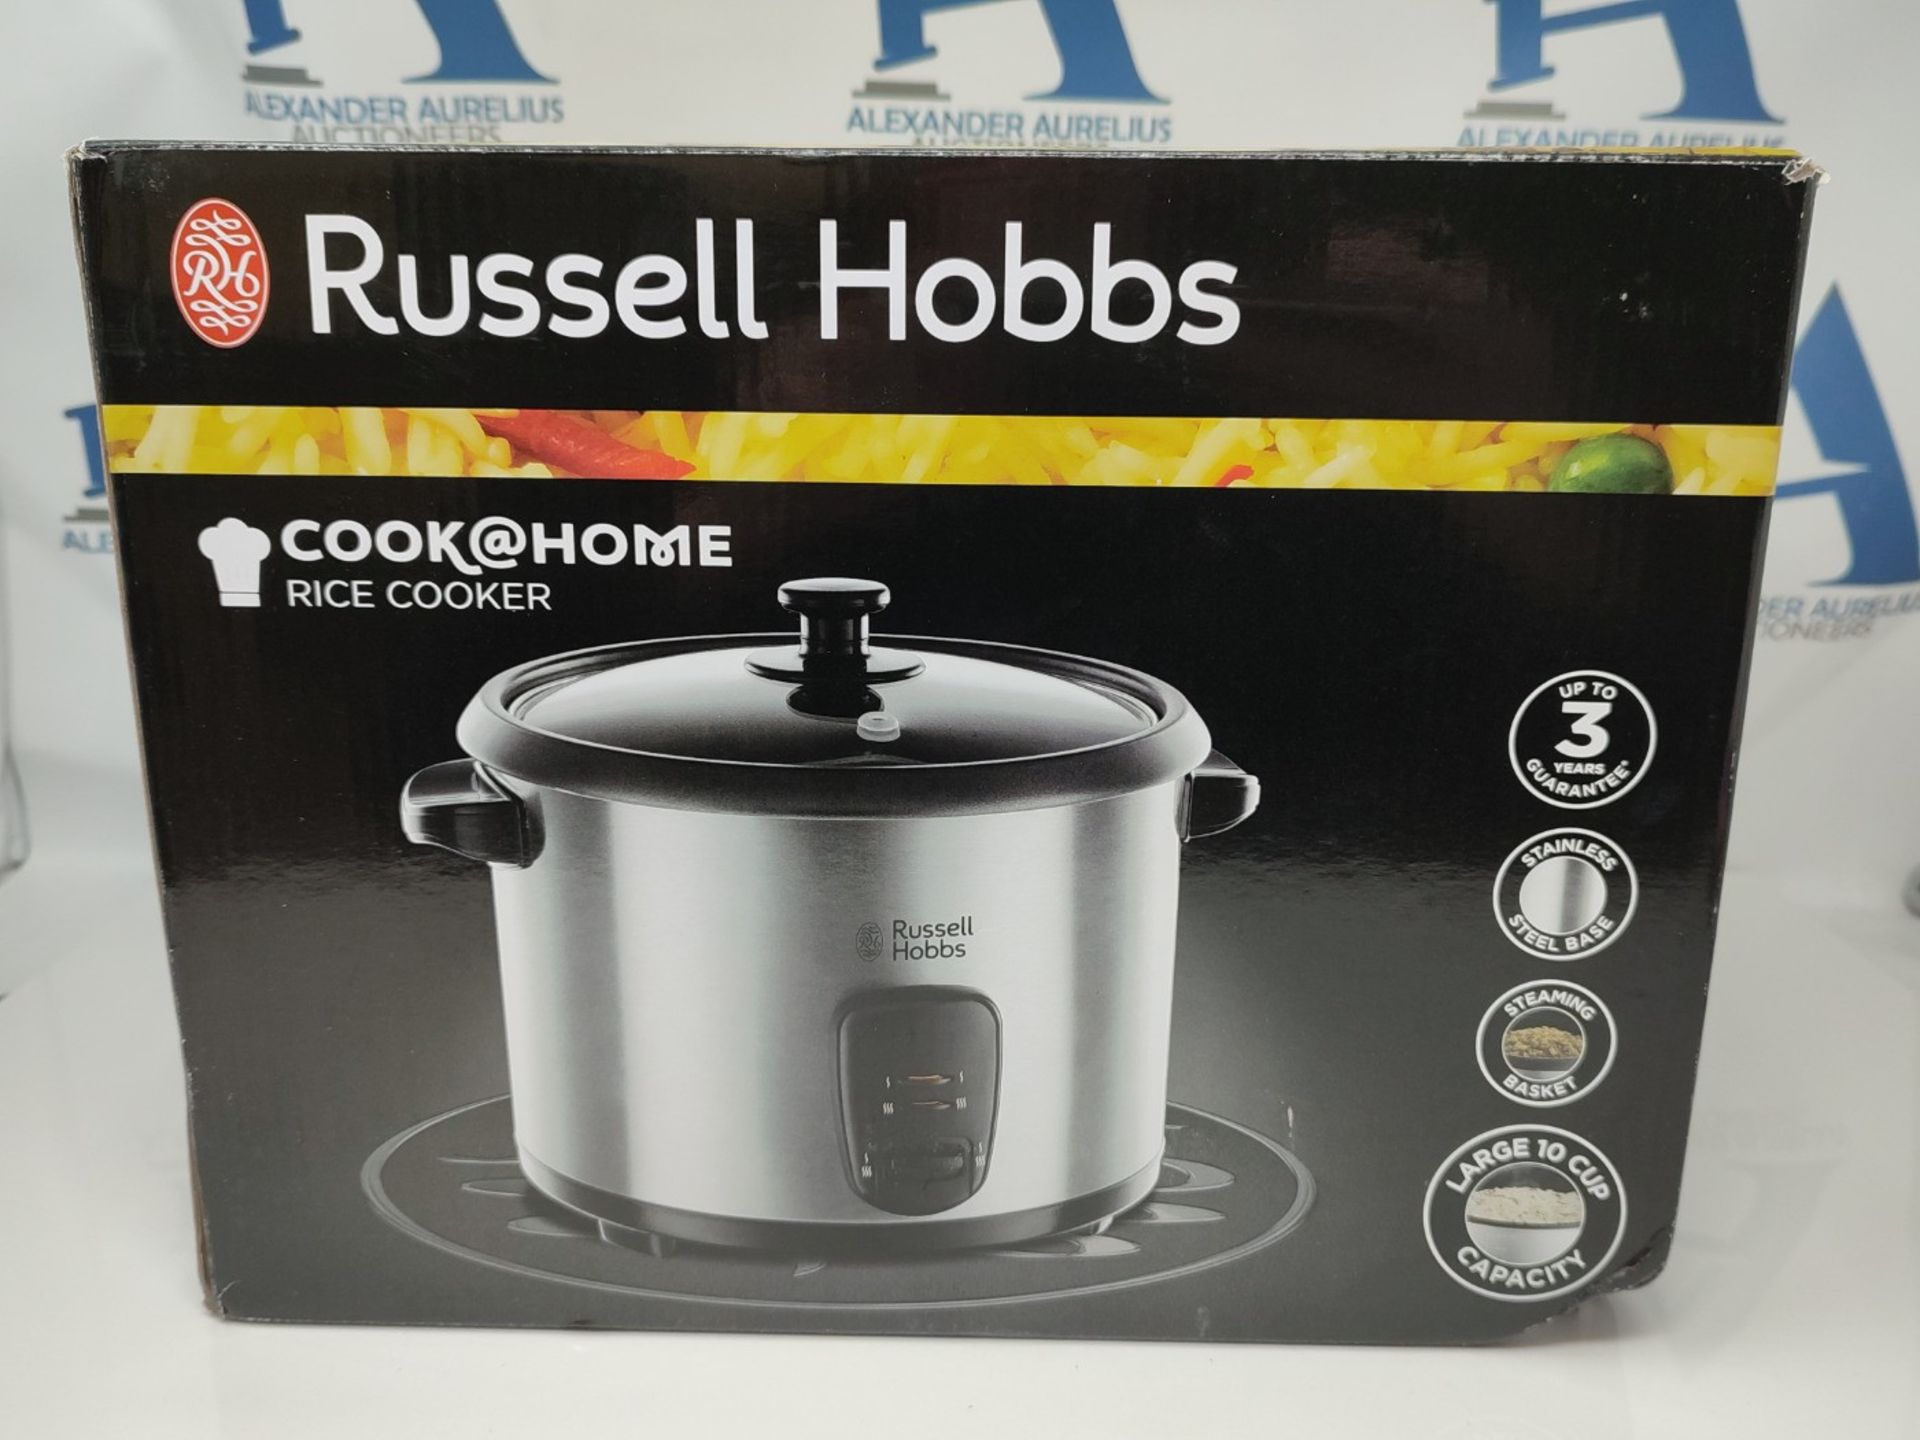 Russell Hobbs 19750 Rice Cooker and Steamer, 1.8L, Silver - Image 2 of 3